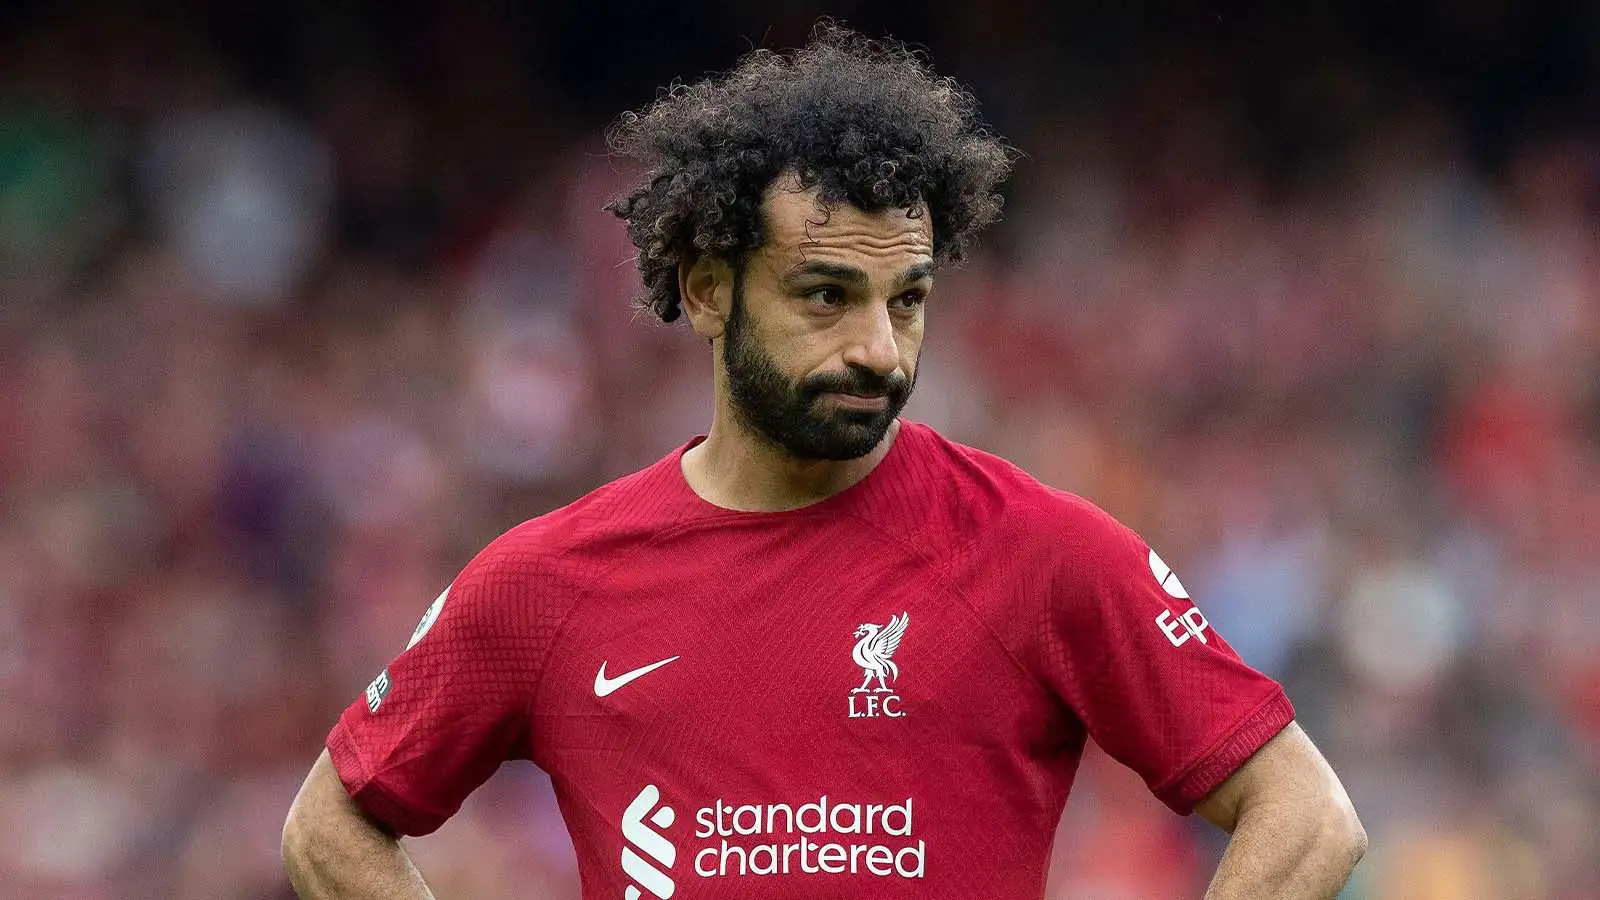 Mo Salah #11 of Liverpool during the Premier League match between Liverpool and Brentford at Anfield, Liverpool on Saturday 6th May 2023.